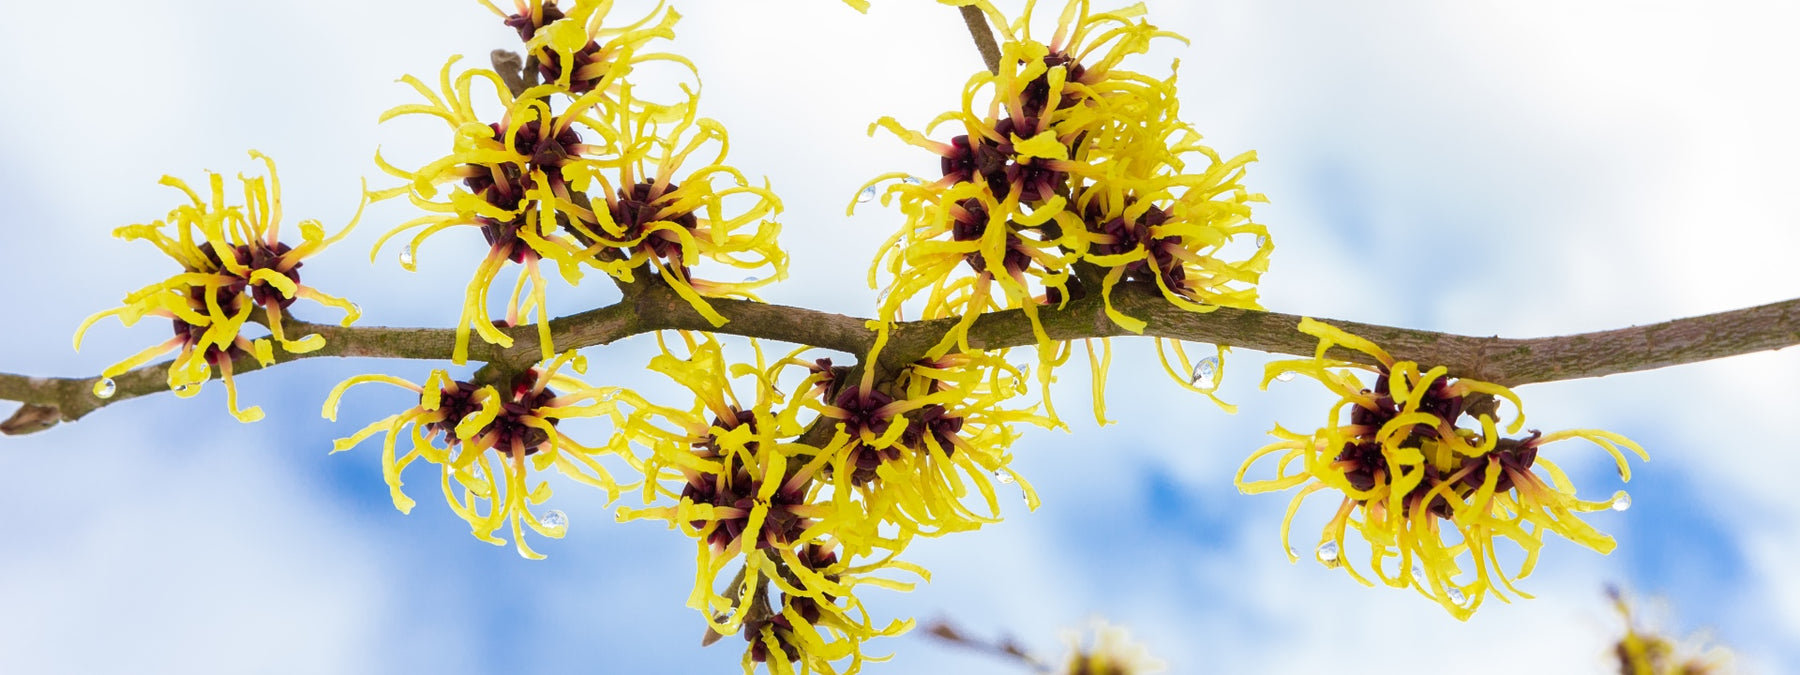 14 Witch Hazel Uses and Benefits